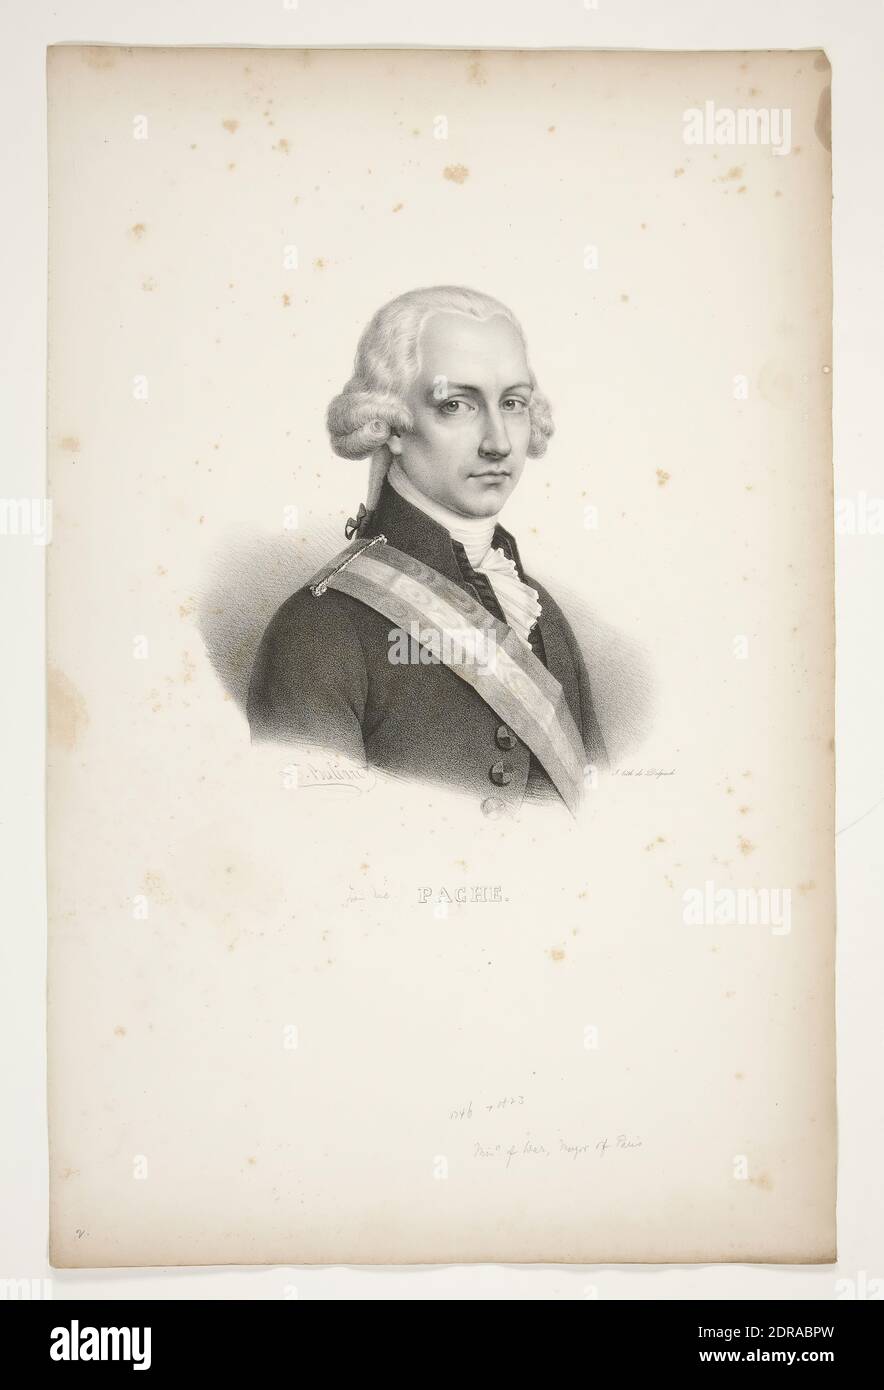 Artist: François-Séraphin Delpech, French, 1778–1825, After: Zéphirin Félix Jean Marius Belliard, French, 1798–1843, Portrait of Pache, Lithograph, Sheet: 50.8 × 33 cm (20 × 13in.), French, 19th century, Works on Paper - Prints Stock Photo